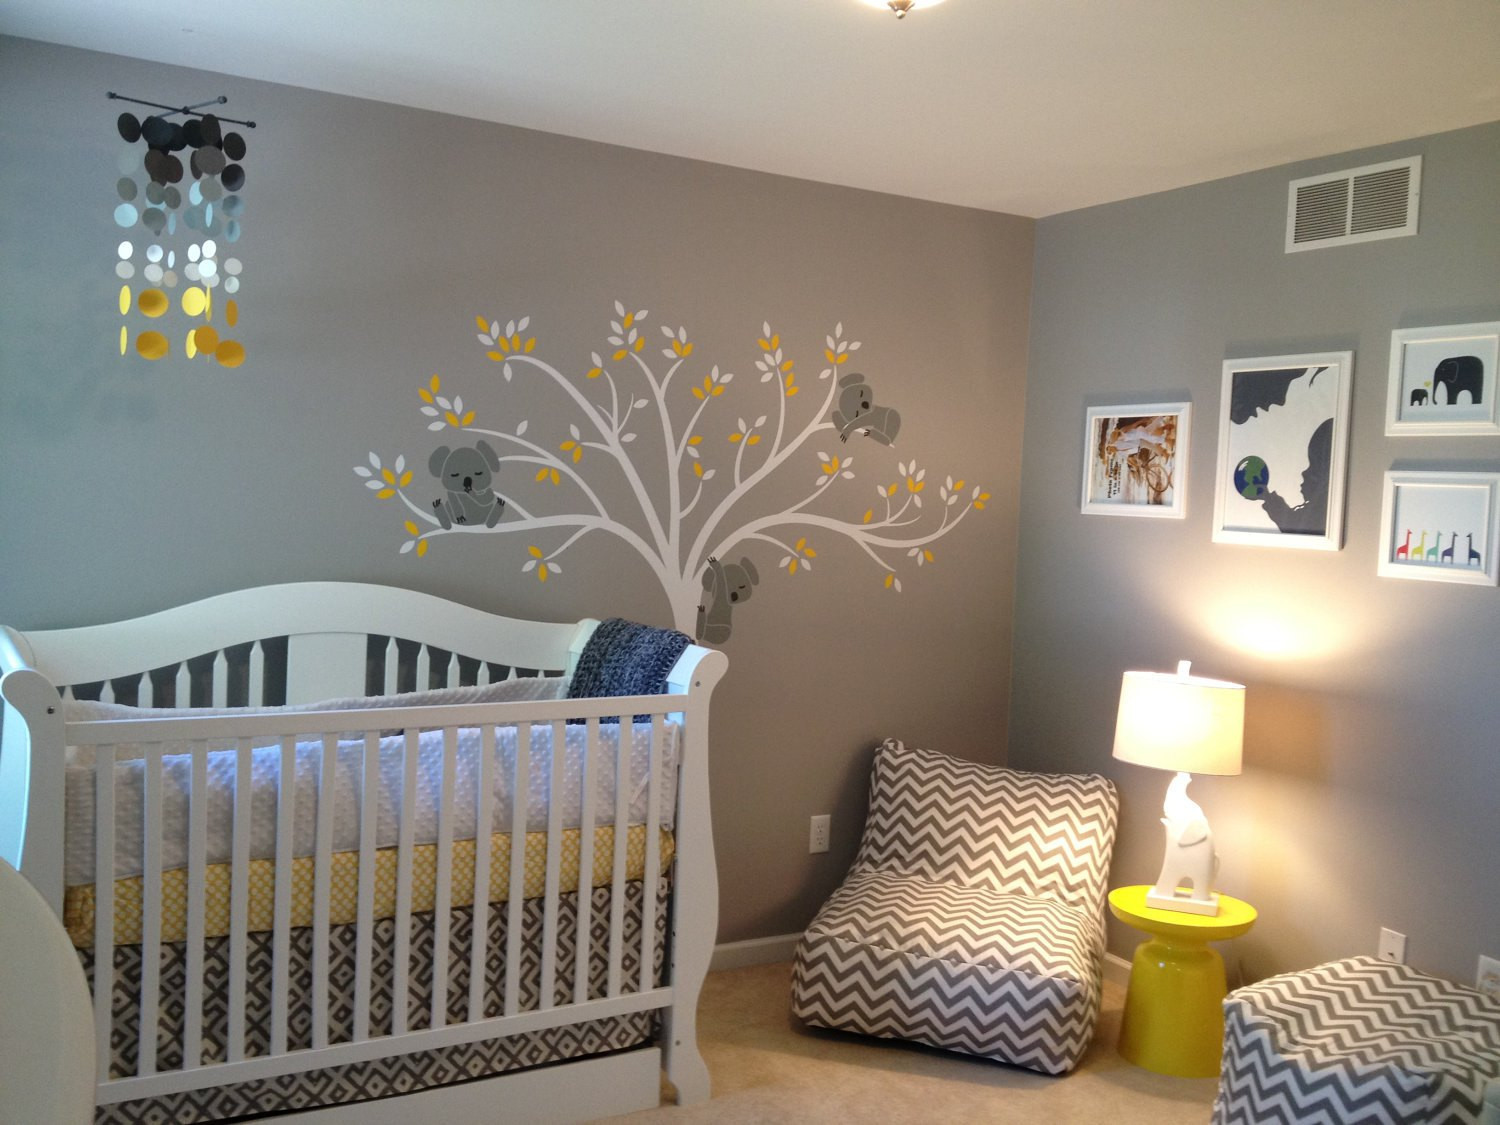 Baby Room Wall Decor Ideas
 What Is the Best Nursery Wall Decor for Both Boys and